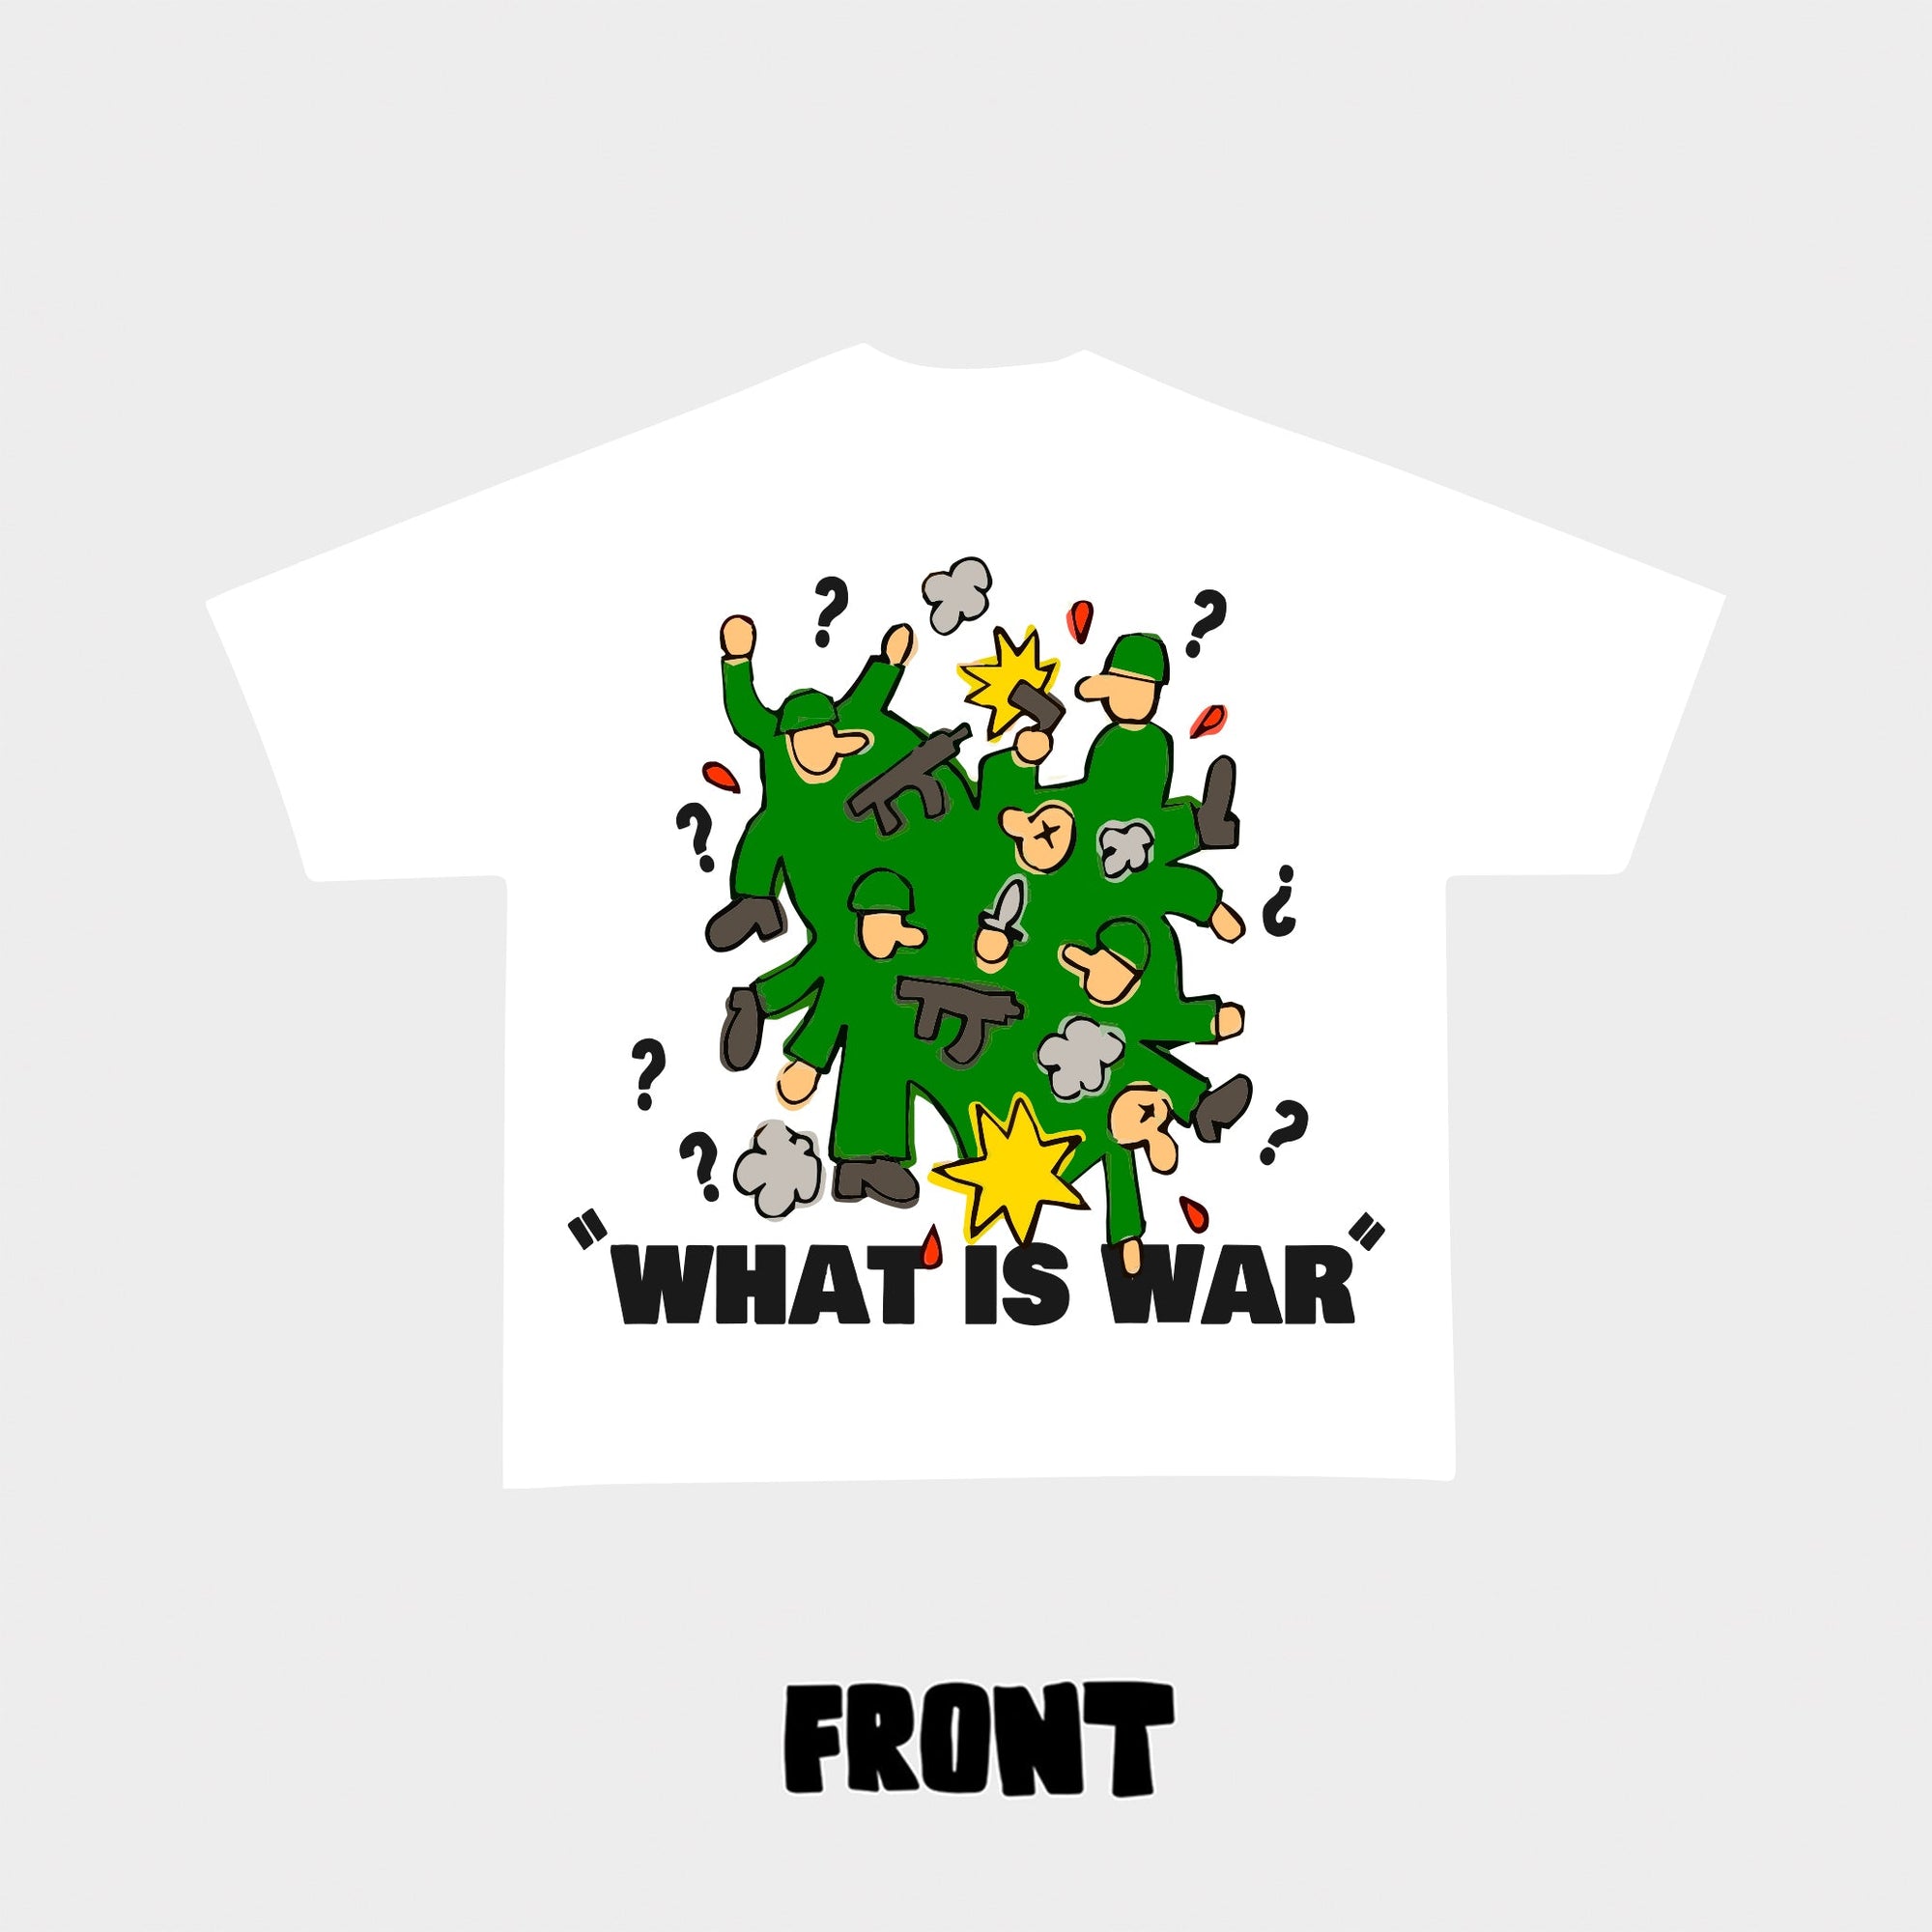 "What is War?" Tee - RED LETTERS